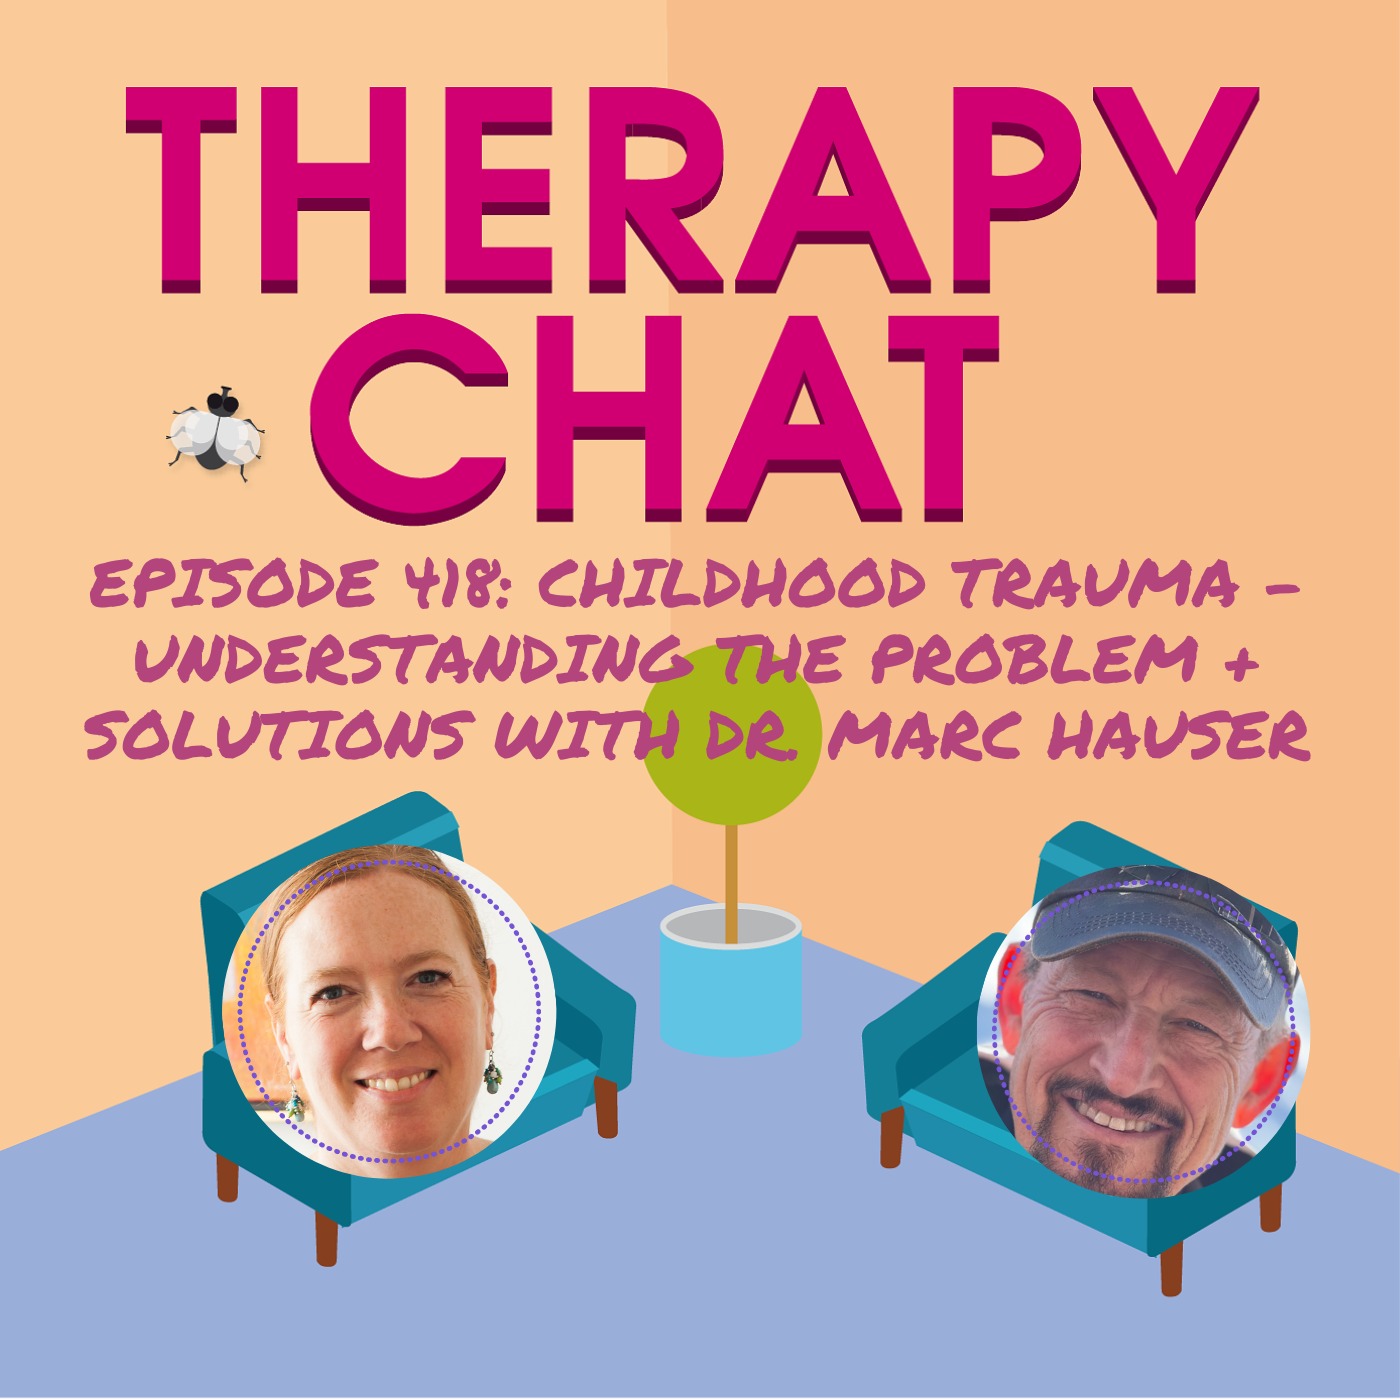 418: Childhood Trauma - Understanding The Problem + Solutions With Dr. Marc Hauser